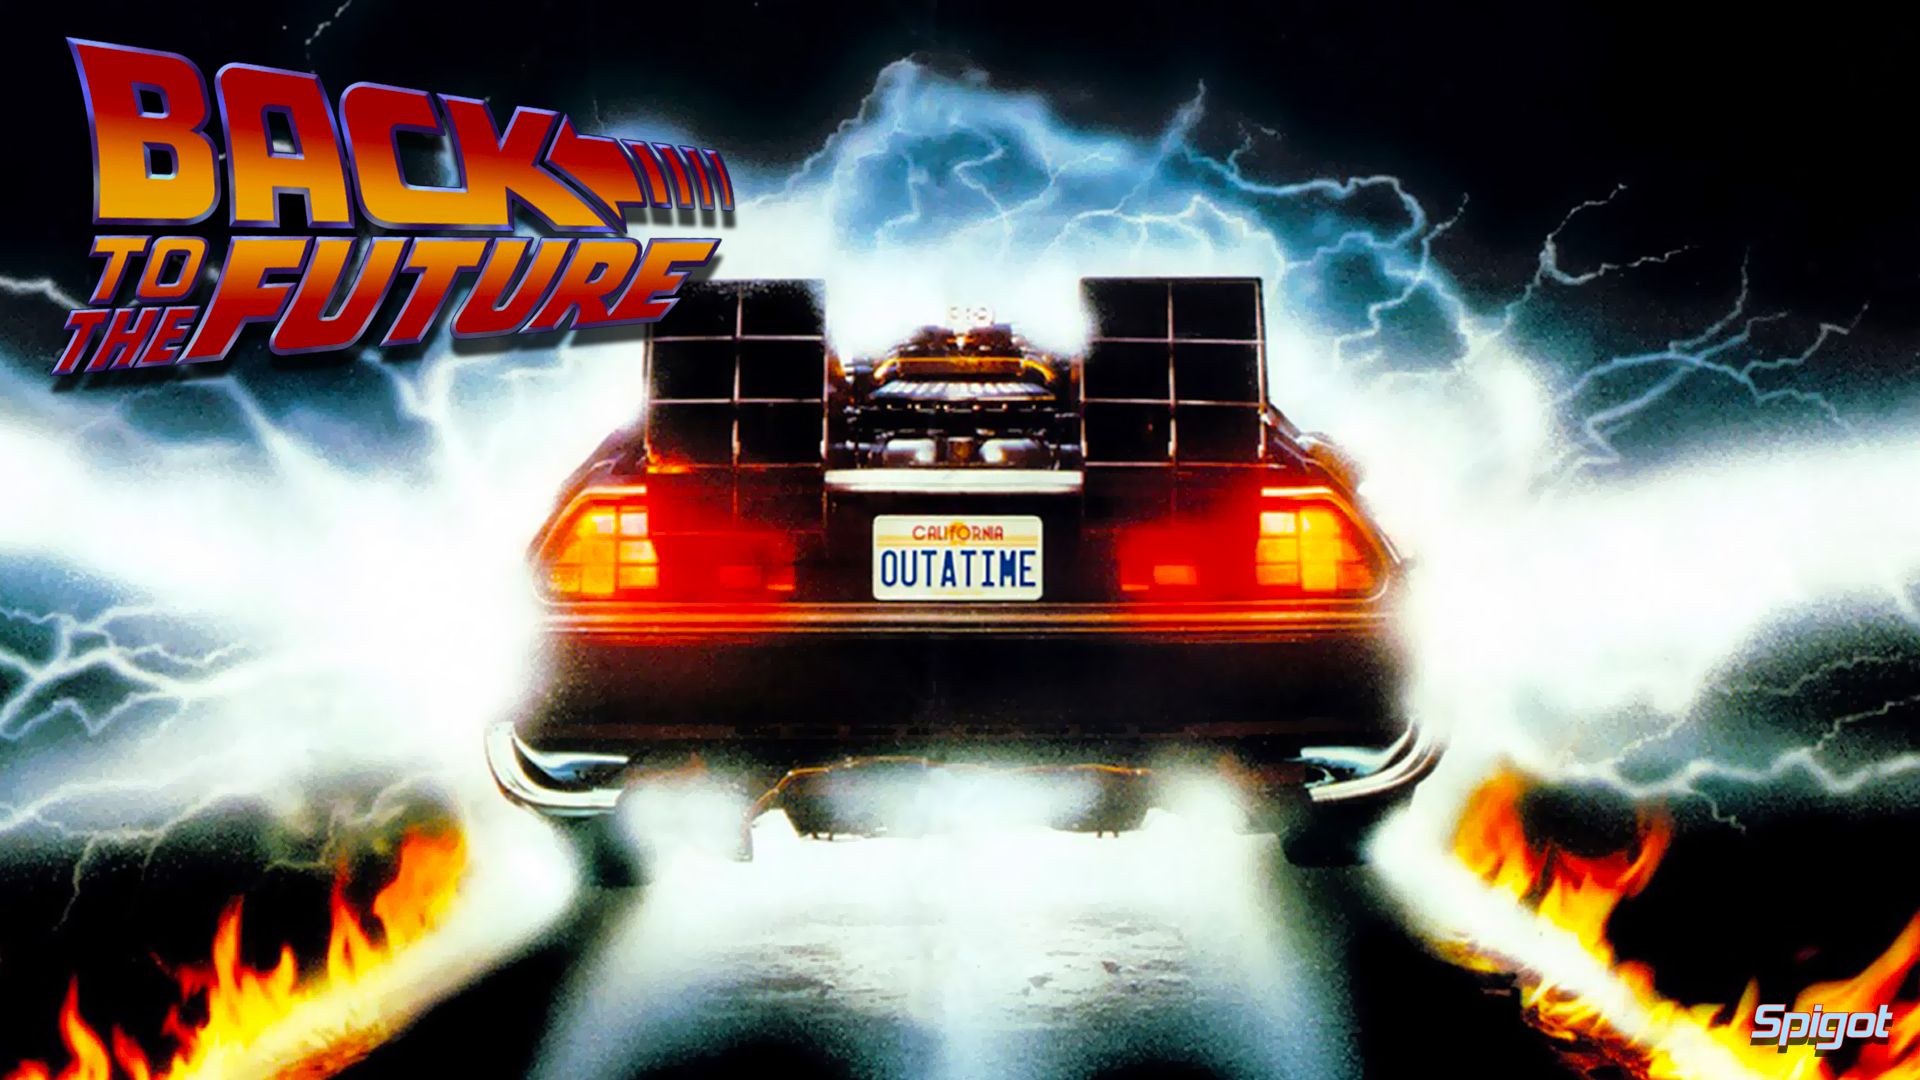 Back to the Future Wallpaper Free Back to the Future Background